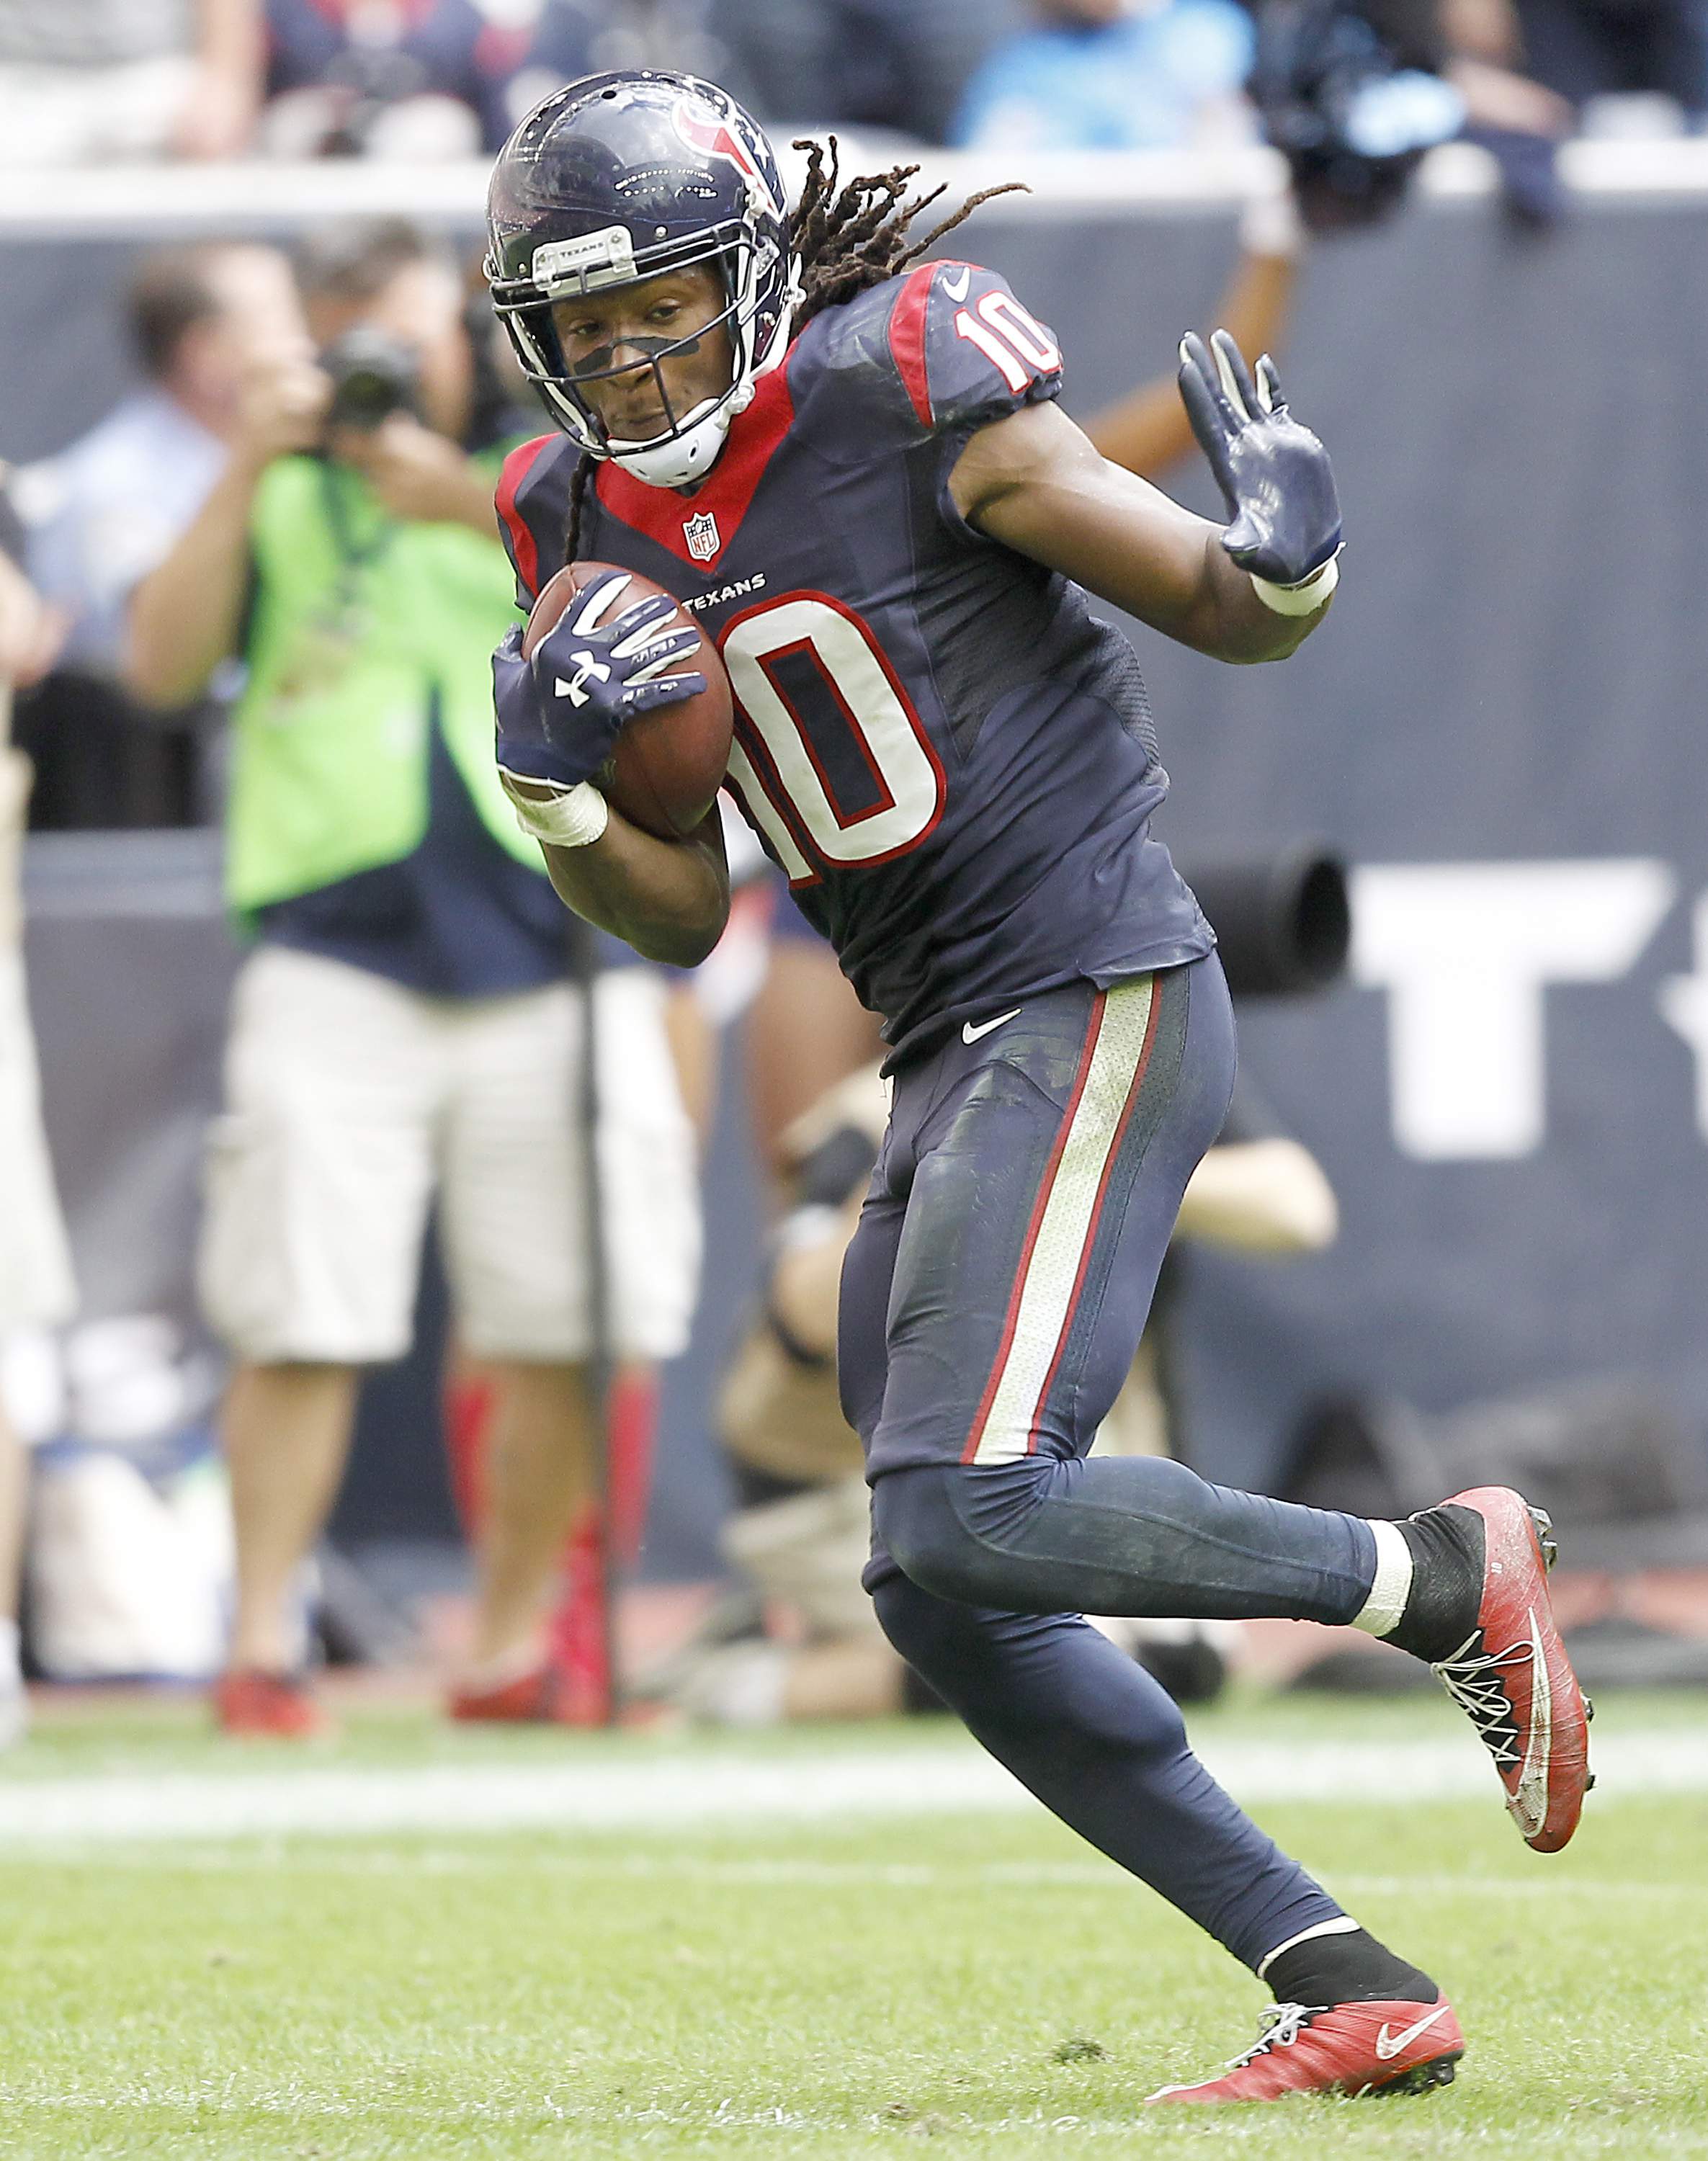 Without Andre Johnson, DeAndre Hopkins needs to step up in